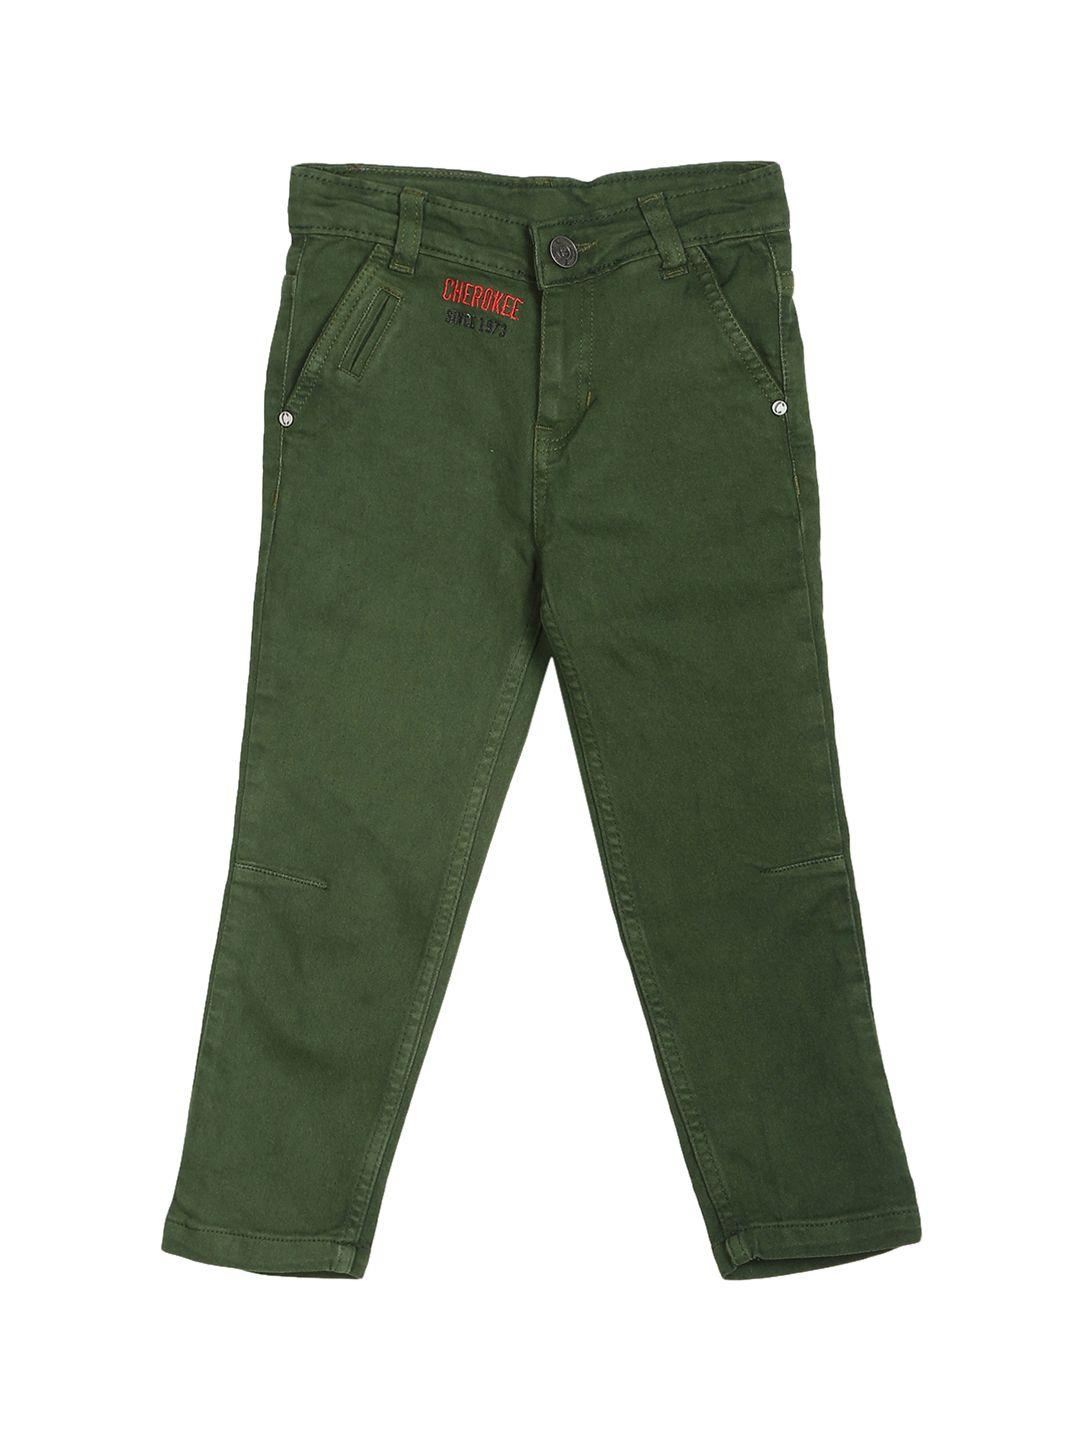 cherokee boys olive green jeans